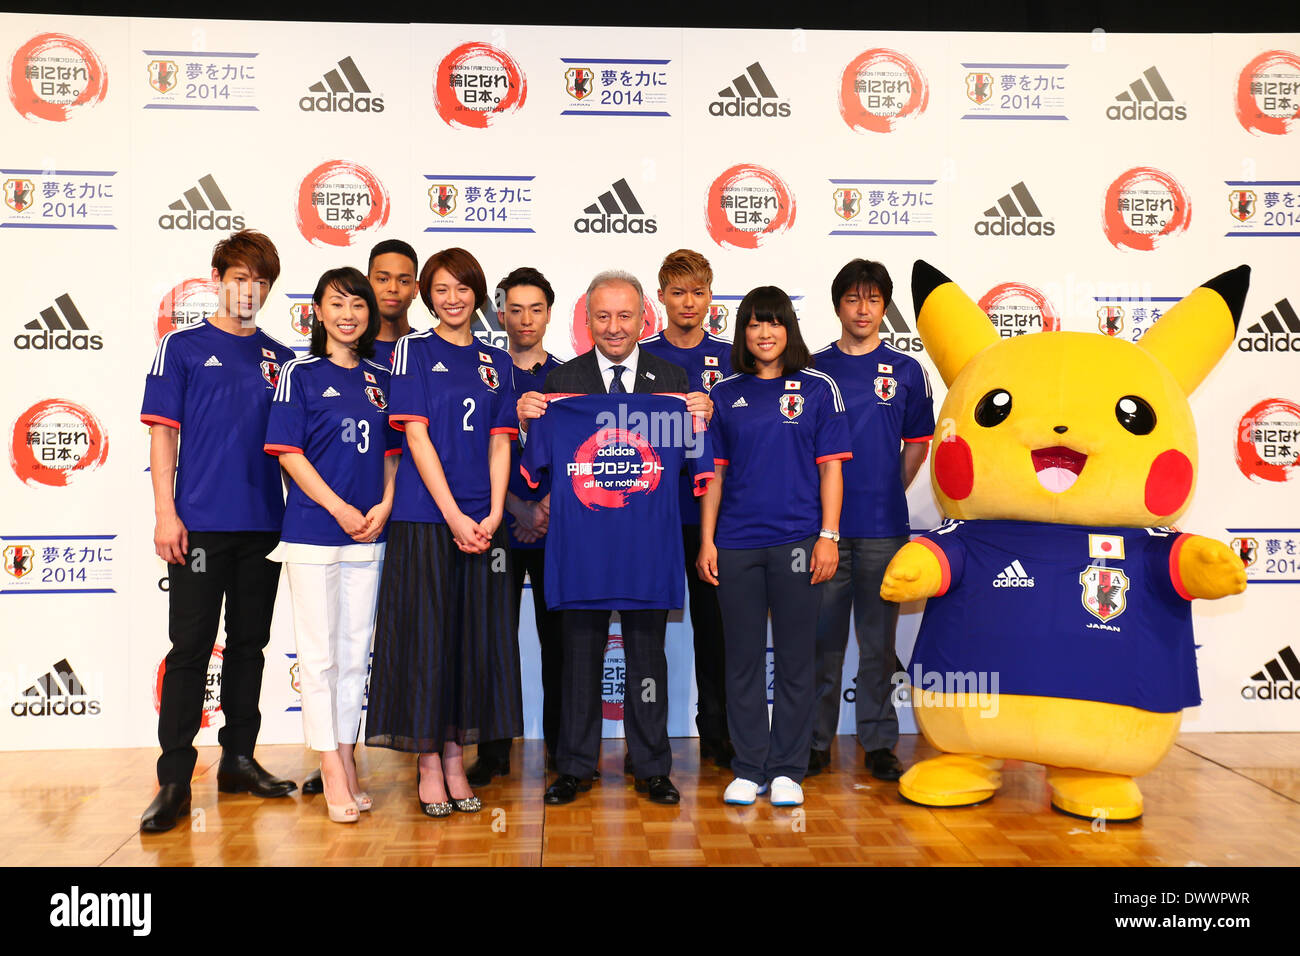 Enjin Ambassador, FEBRUARY 27, 2014 : Enjin ambassadors pose with Japan  national football team's head coach Alberto Zaccheroni during the Launching  Ceremony of adidas "Enjin Project" at Tokyo Dome Hotel in Tokyo,